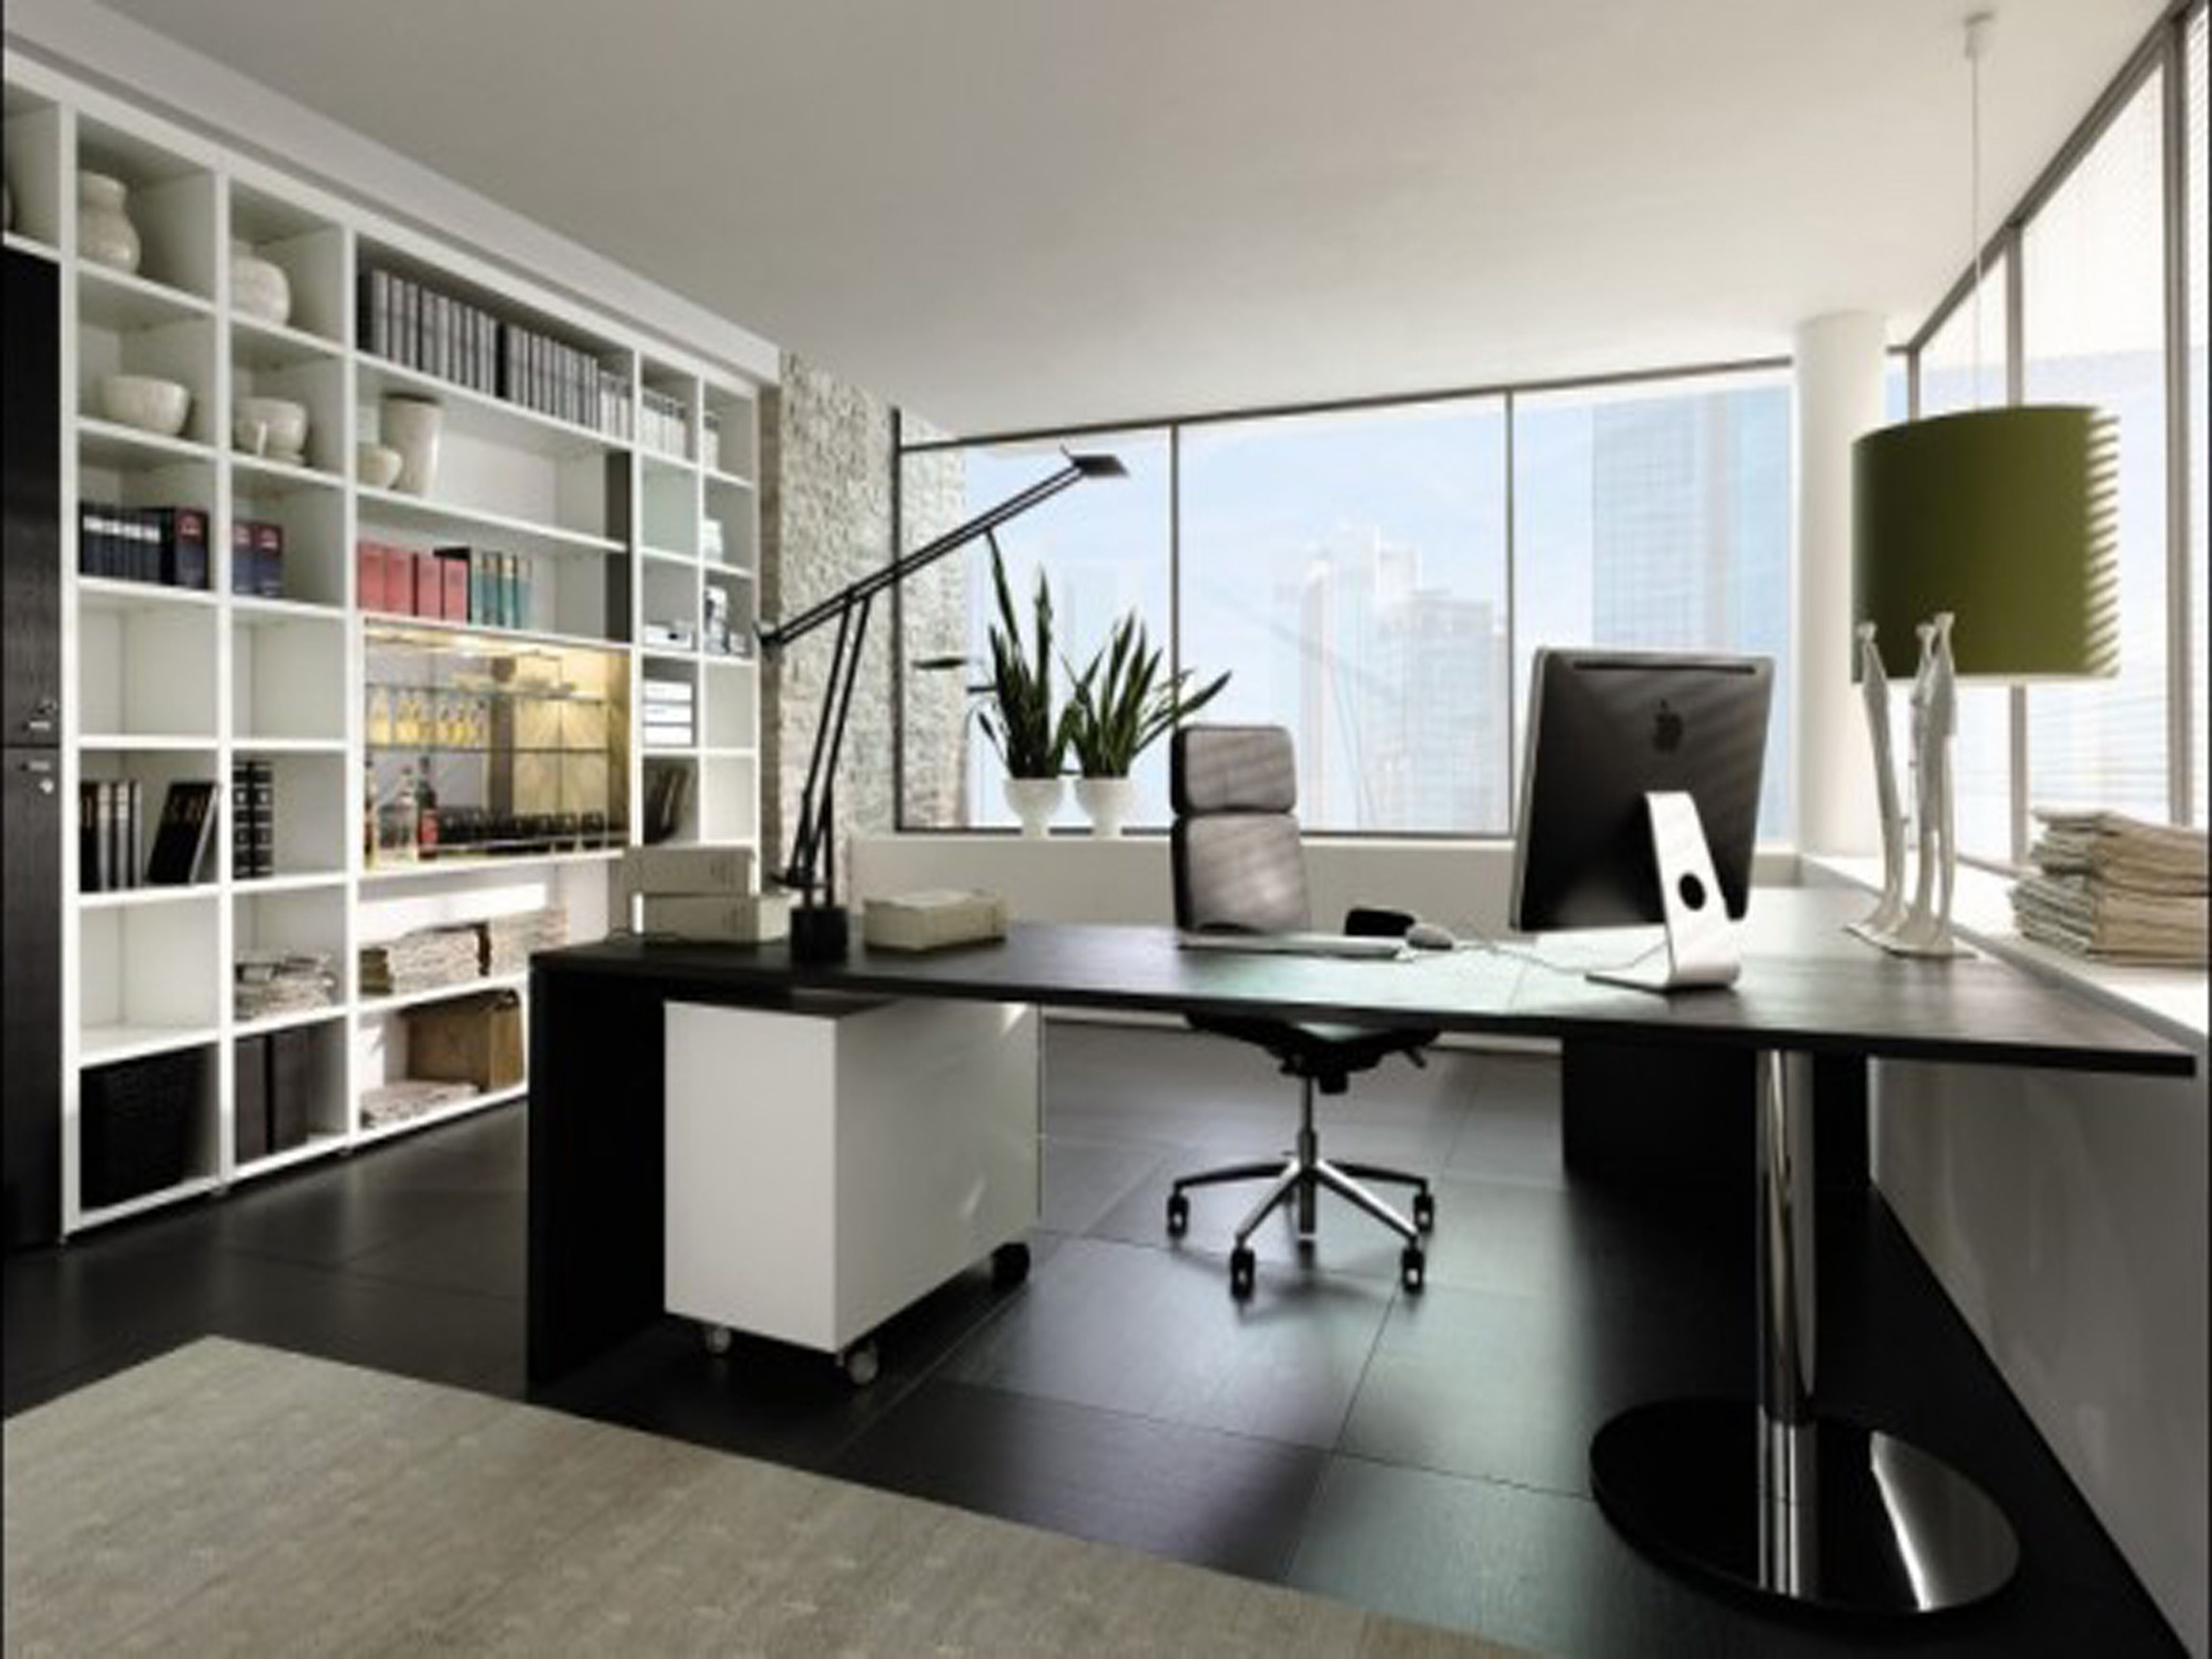 https://theofficefurniturestore.files.wordpress.com/2014/11/office-workspace-home-office-design-ideas-interior-with-black-wooden-tables-white-wooden-shelf-attached-to-the-wall-of-the-left-as-well-as-a-round-table-lamp-beautiful-green-color-on-the.jpg